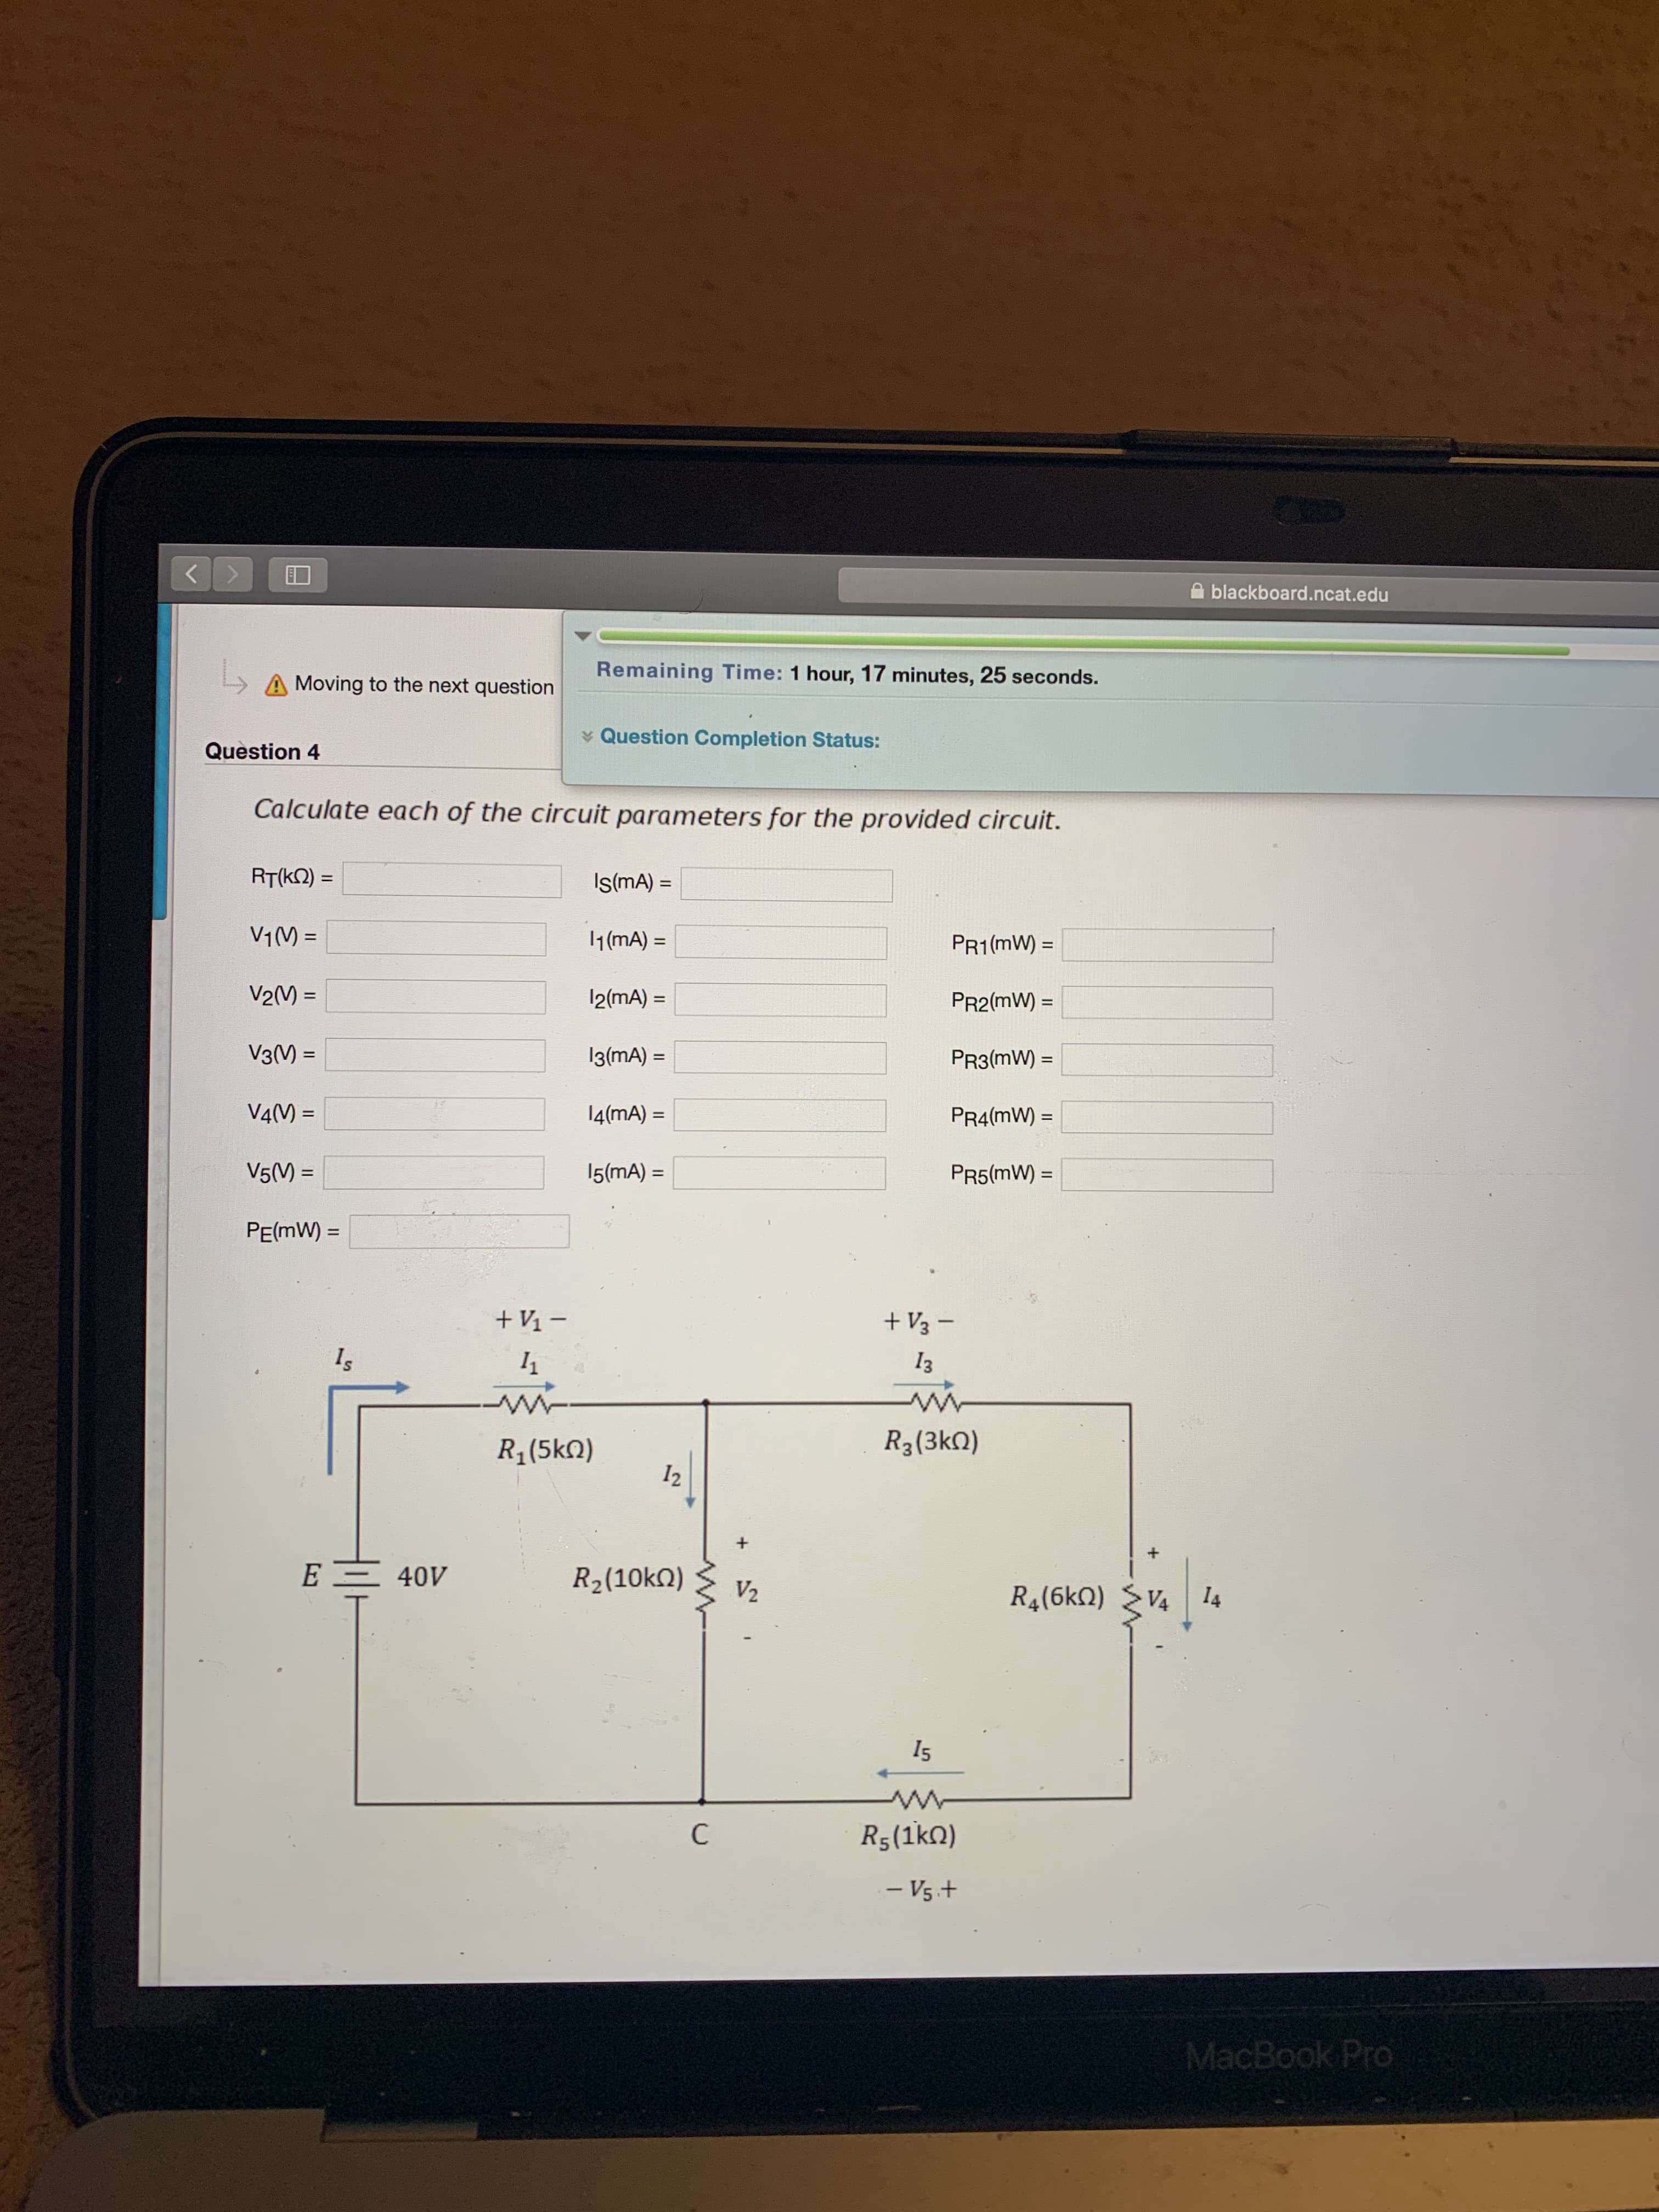 blackboard.ncat.edu
Remaining Time: 1 hour, 17 minutes, 25 seconds.
A Moving to the next question
* Question Completion Status:
Question 4
Calculate each of the circuit parameters for the provided circuit.
RT(kN) =
IsmA) =
%3D
V1(M =
1(mA) =
%3D
PR1(mW) =
%3D
V2(V) =
12(mA) =
PR2(mW) =
%3D
%3D
%3D
V3() =
I3(mA) =
PR3(mW) =
%3D
V4(M) =
14(mA) =
PR4(mW) =
%3D
V5(M) =
15(mA) =
PR5(mW) =
PE(mW) =
+ V1 –
+ V3 -
Is
I3
R1(5kN)
R3(3kO)
12
E -
40V
R2(10kQ)
V2
R4(6kn)
V4
I4
I5
C
R5(1kn)
- Vs.+
MacBook Pro
